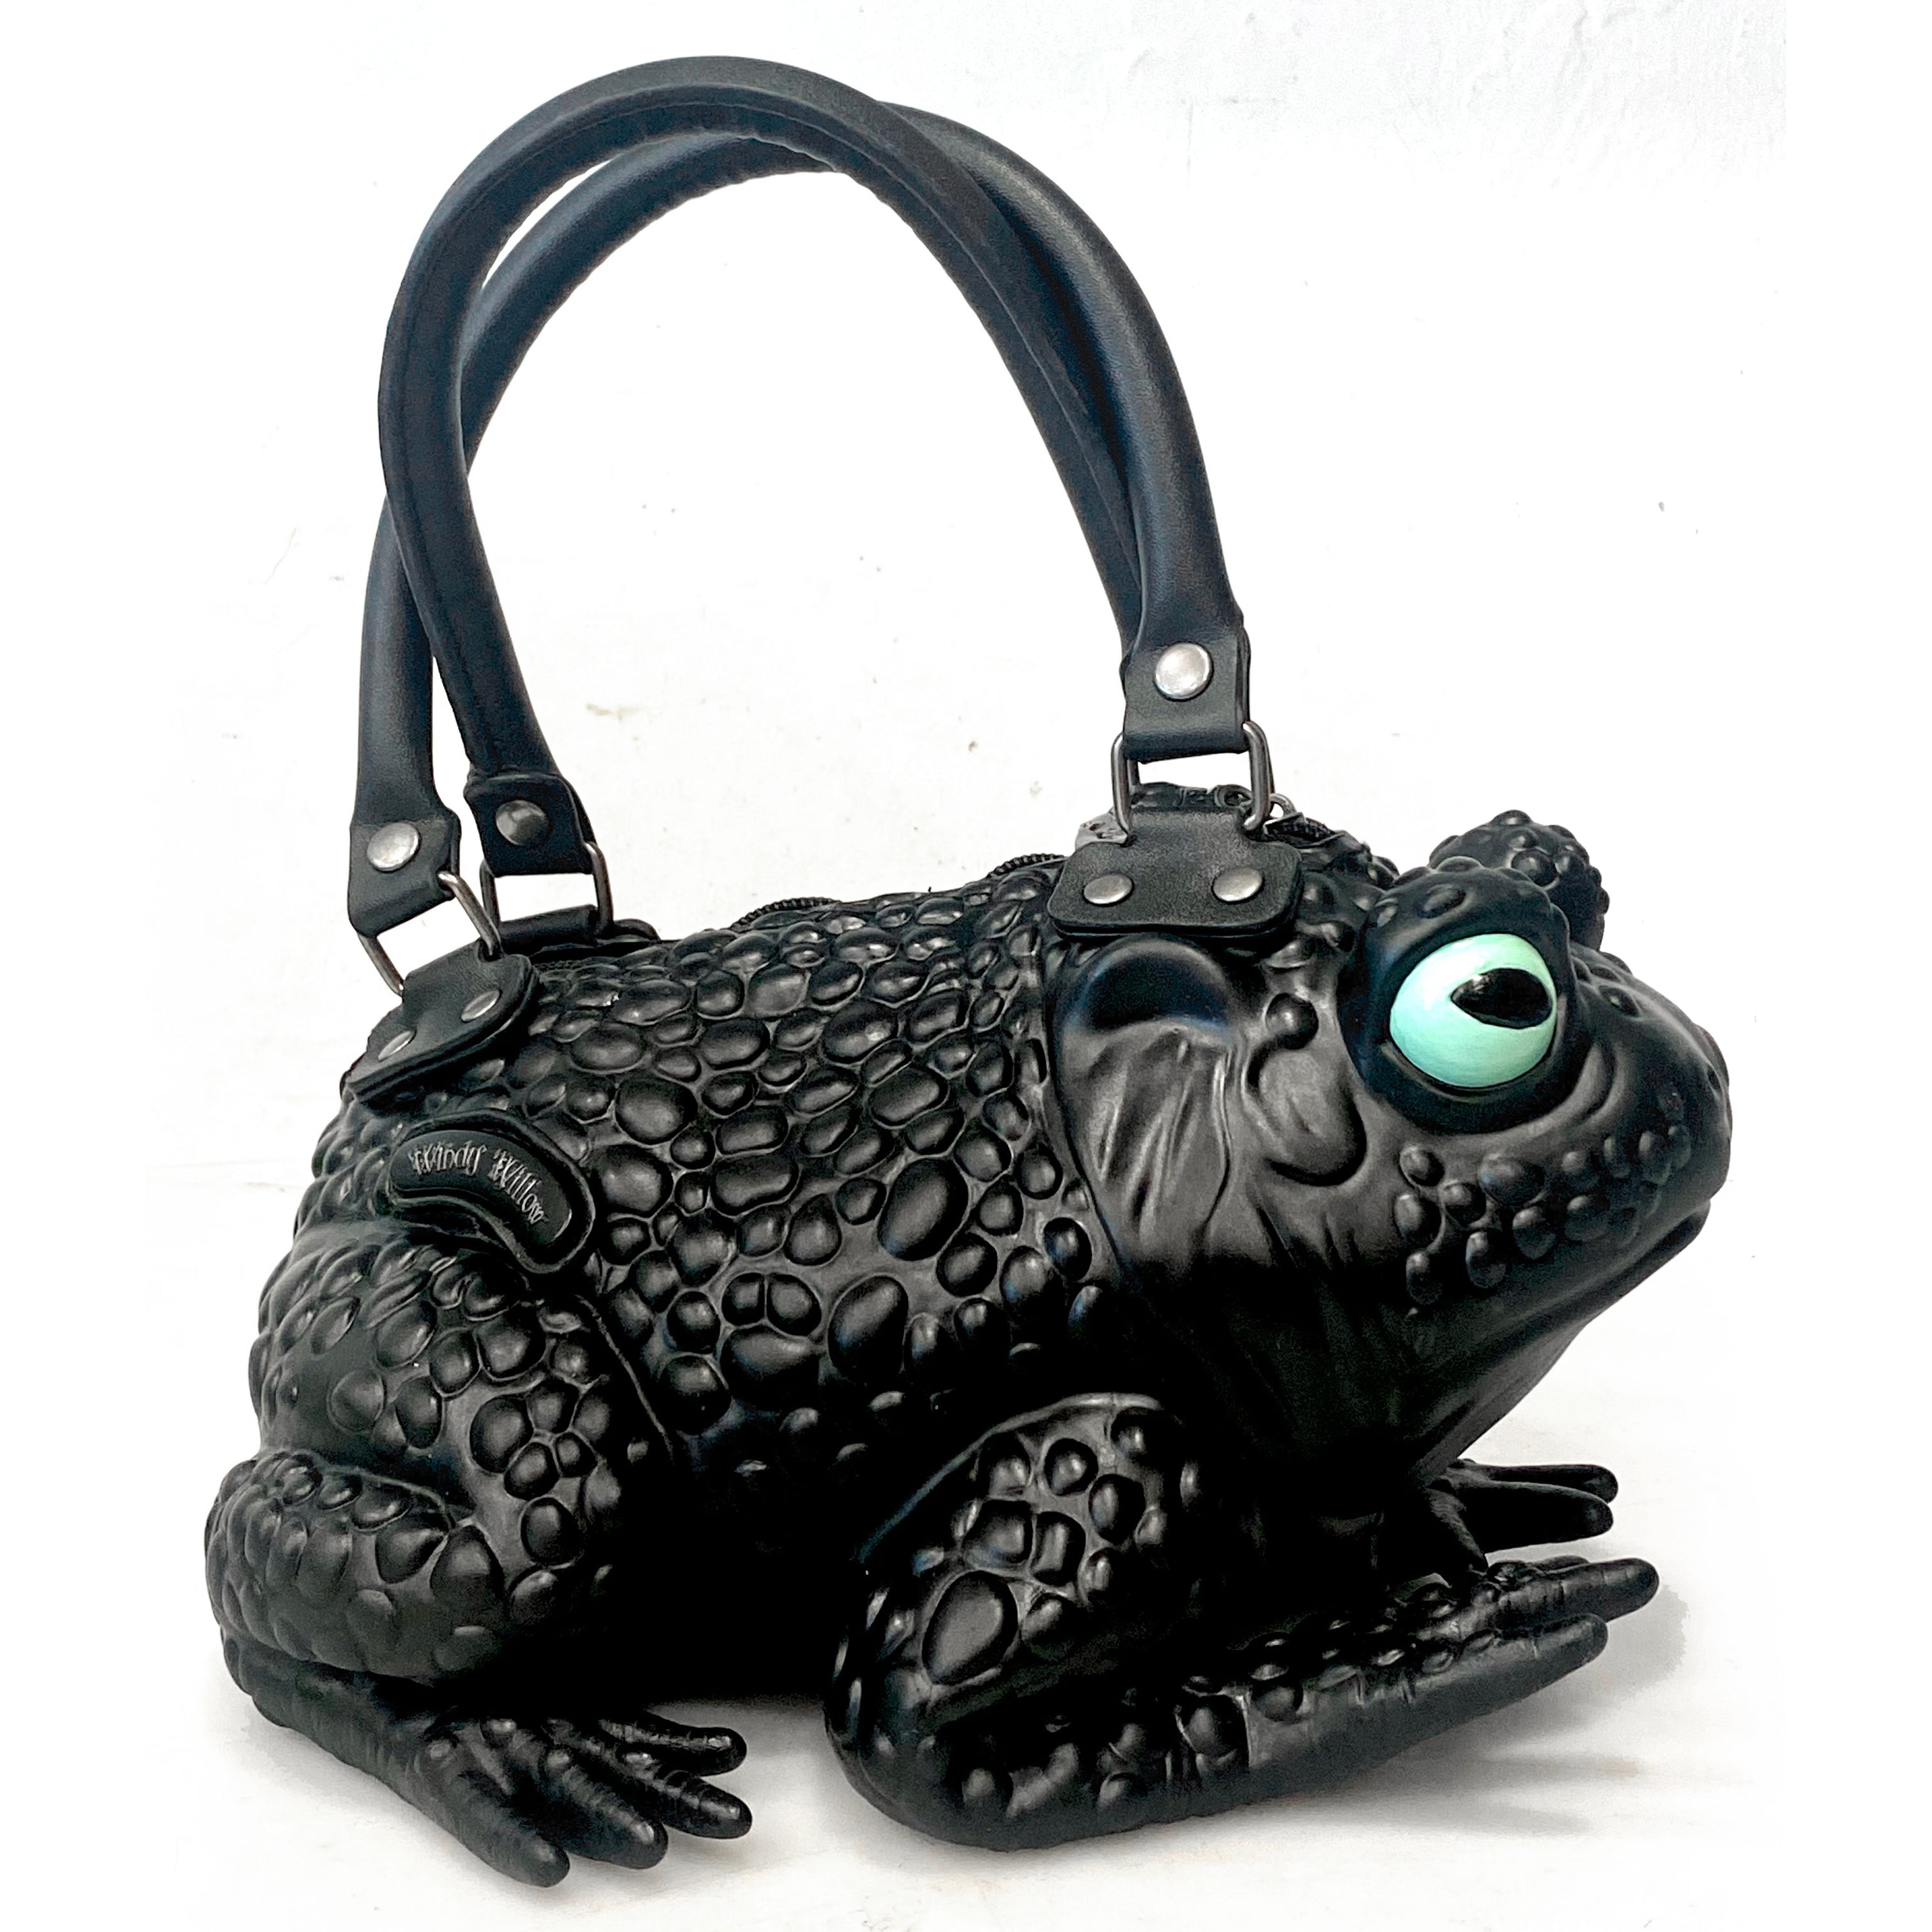 Amazon.com: Retro Toad Tote Bag : Clothing, Shoes & Jewelry